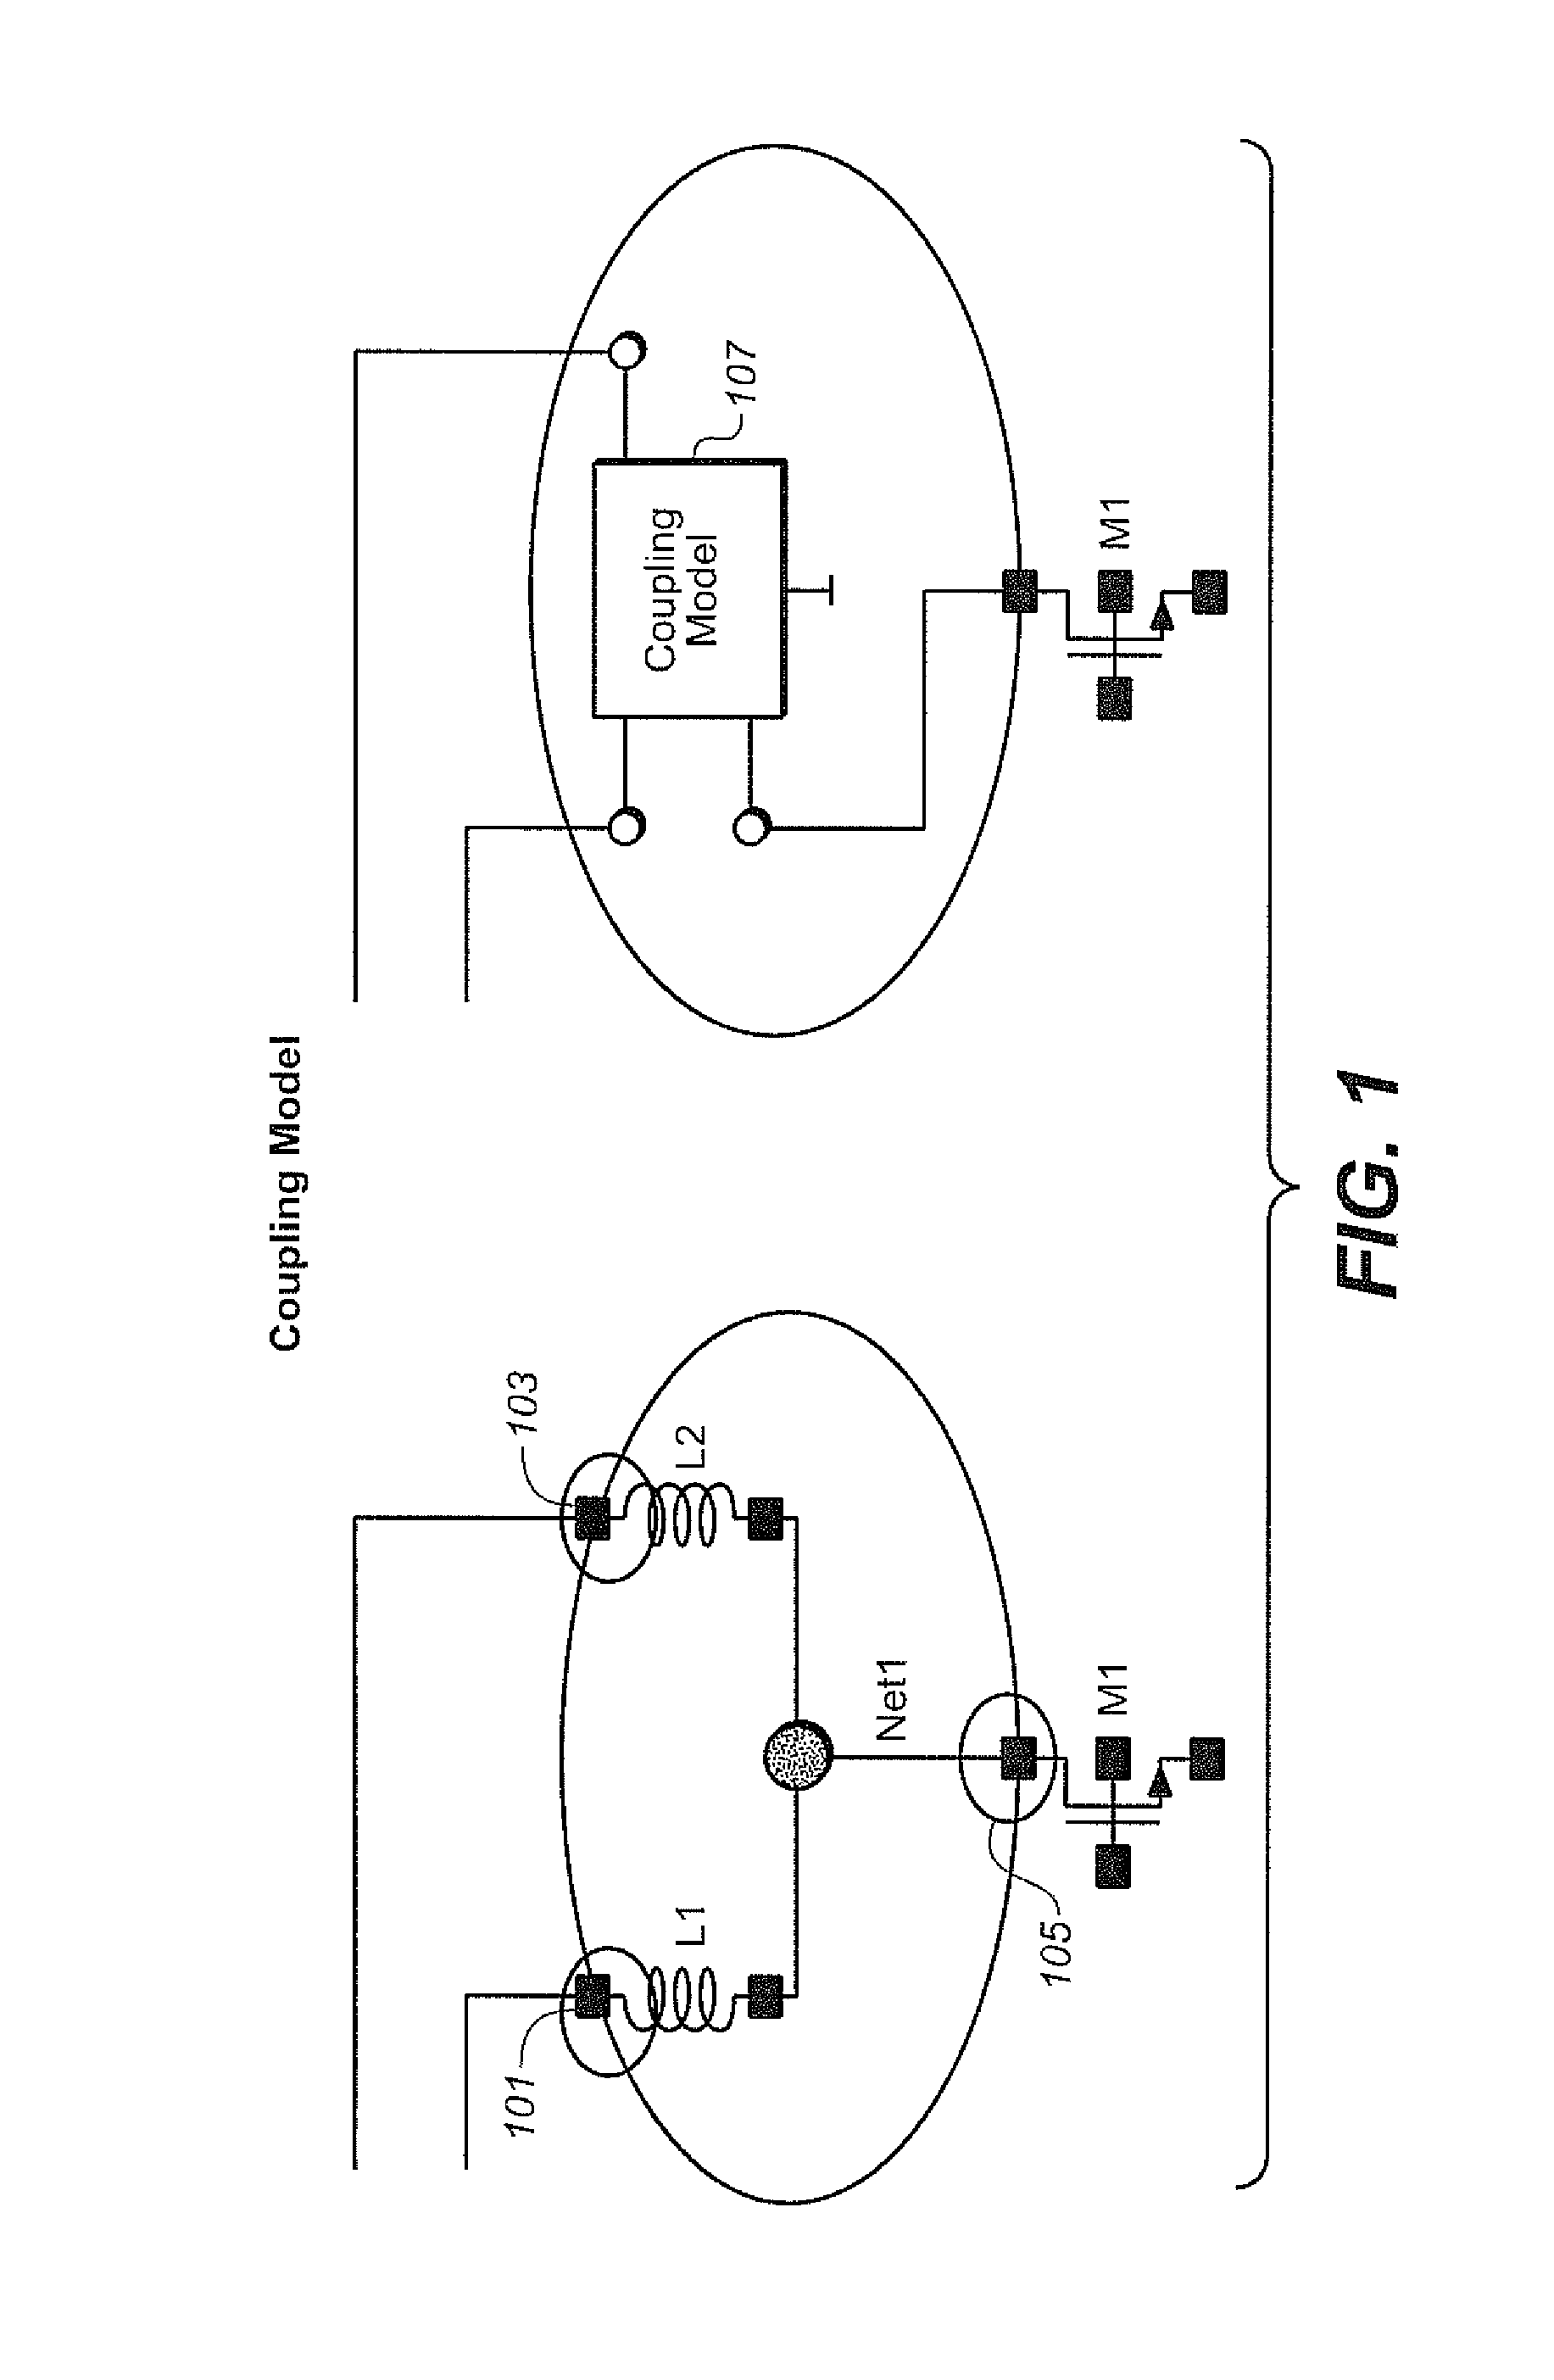 Technique for modeling parasitics from layout during circuit design and for parasitic aware circuit design using modes of varying accuracy